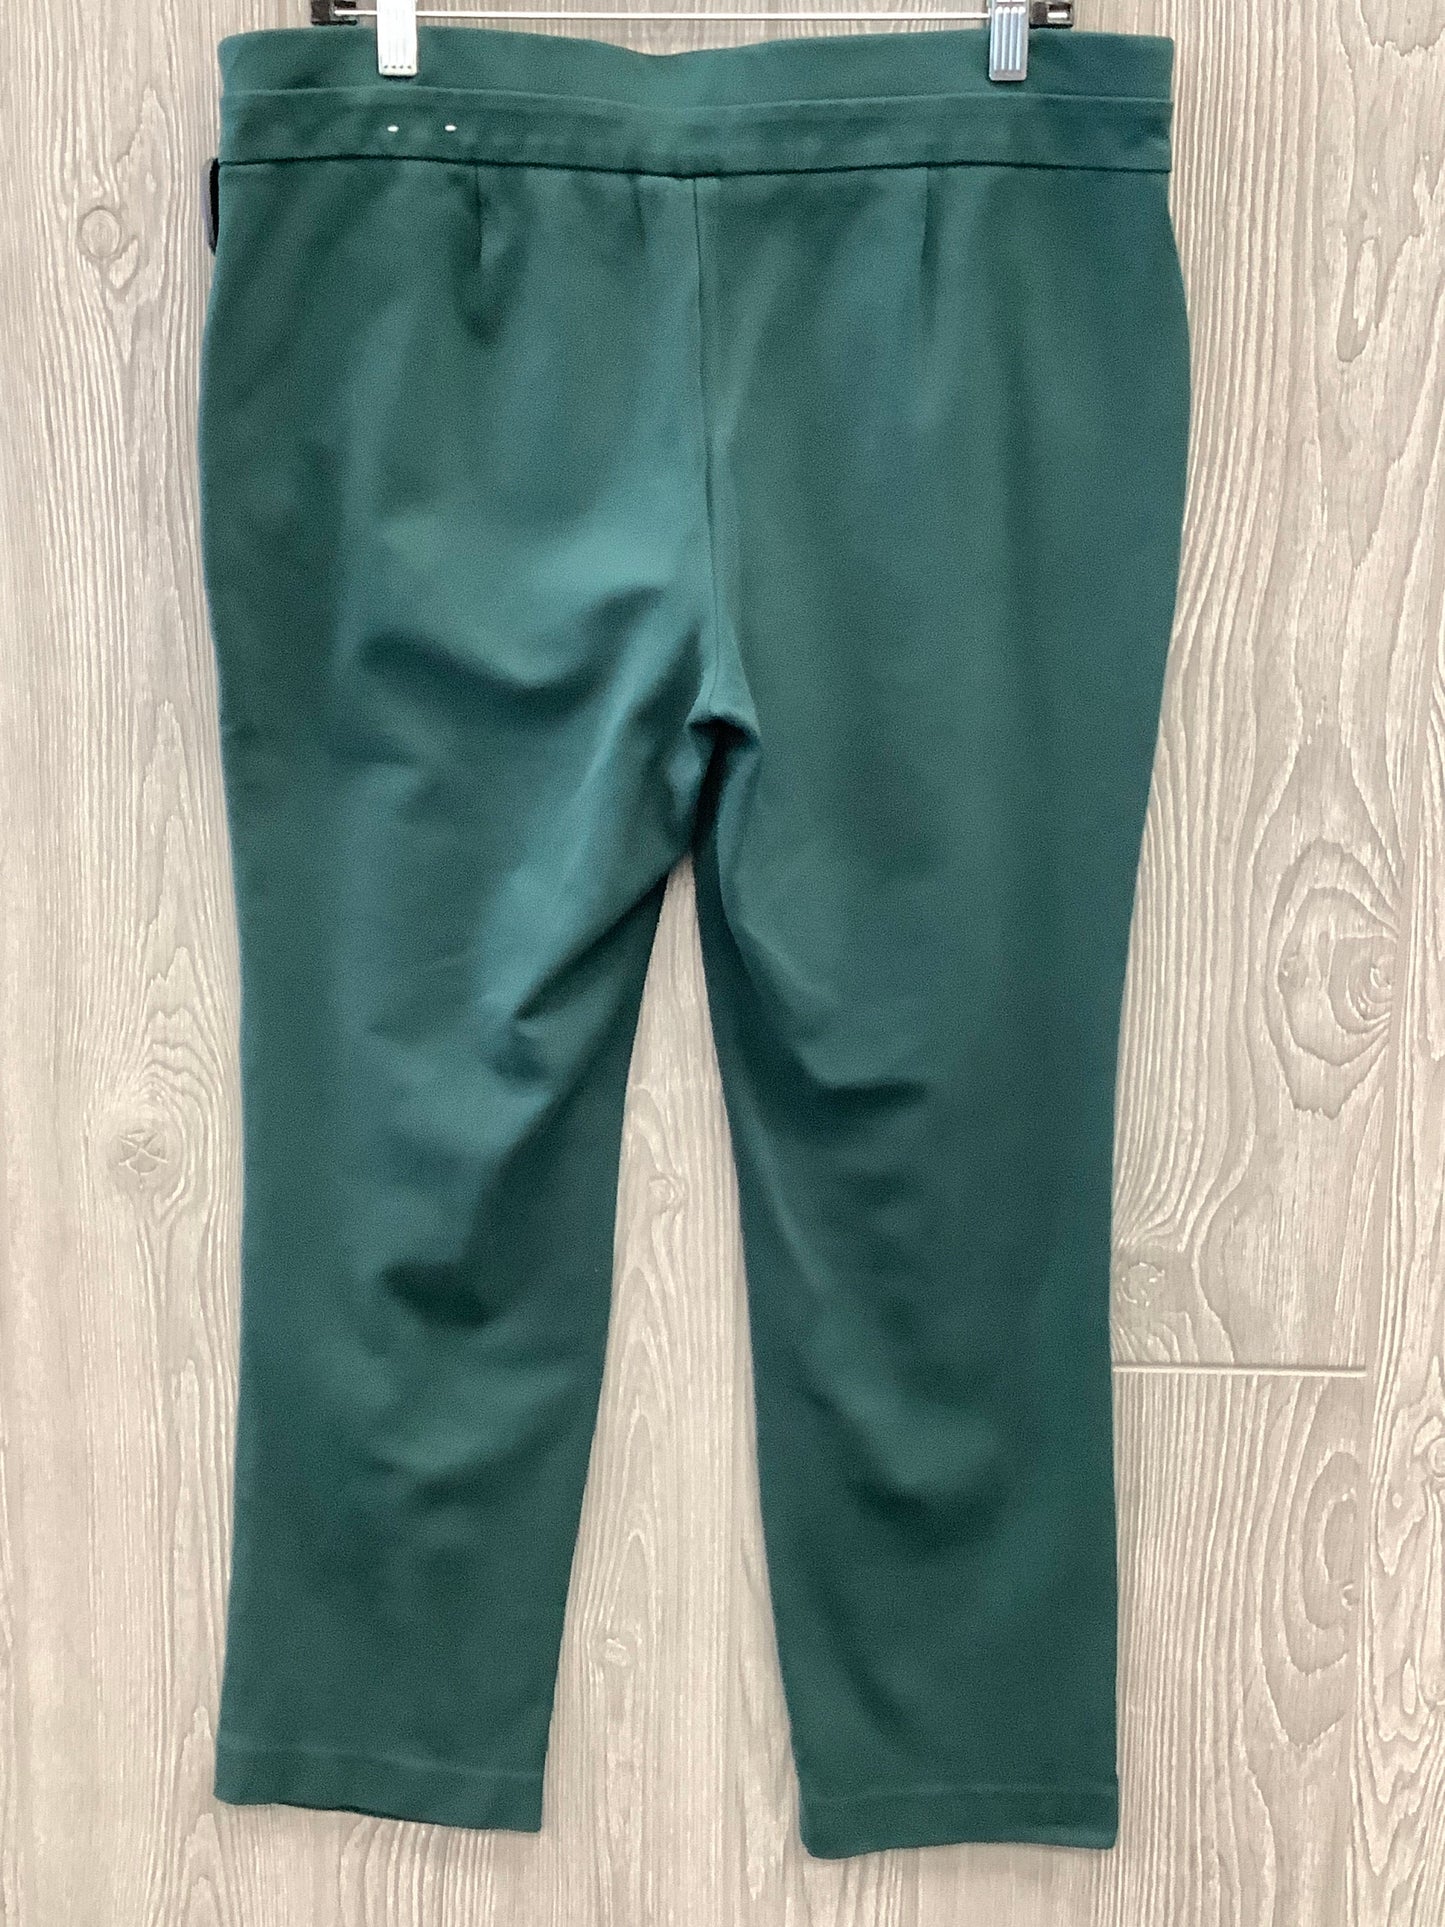 Pants Ankle By Anne Klein  Size: 12